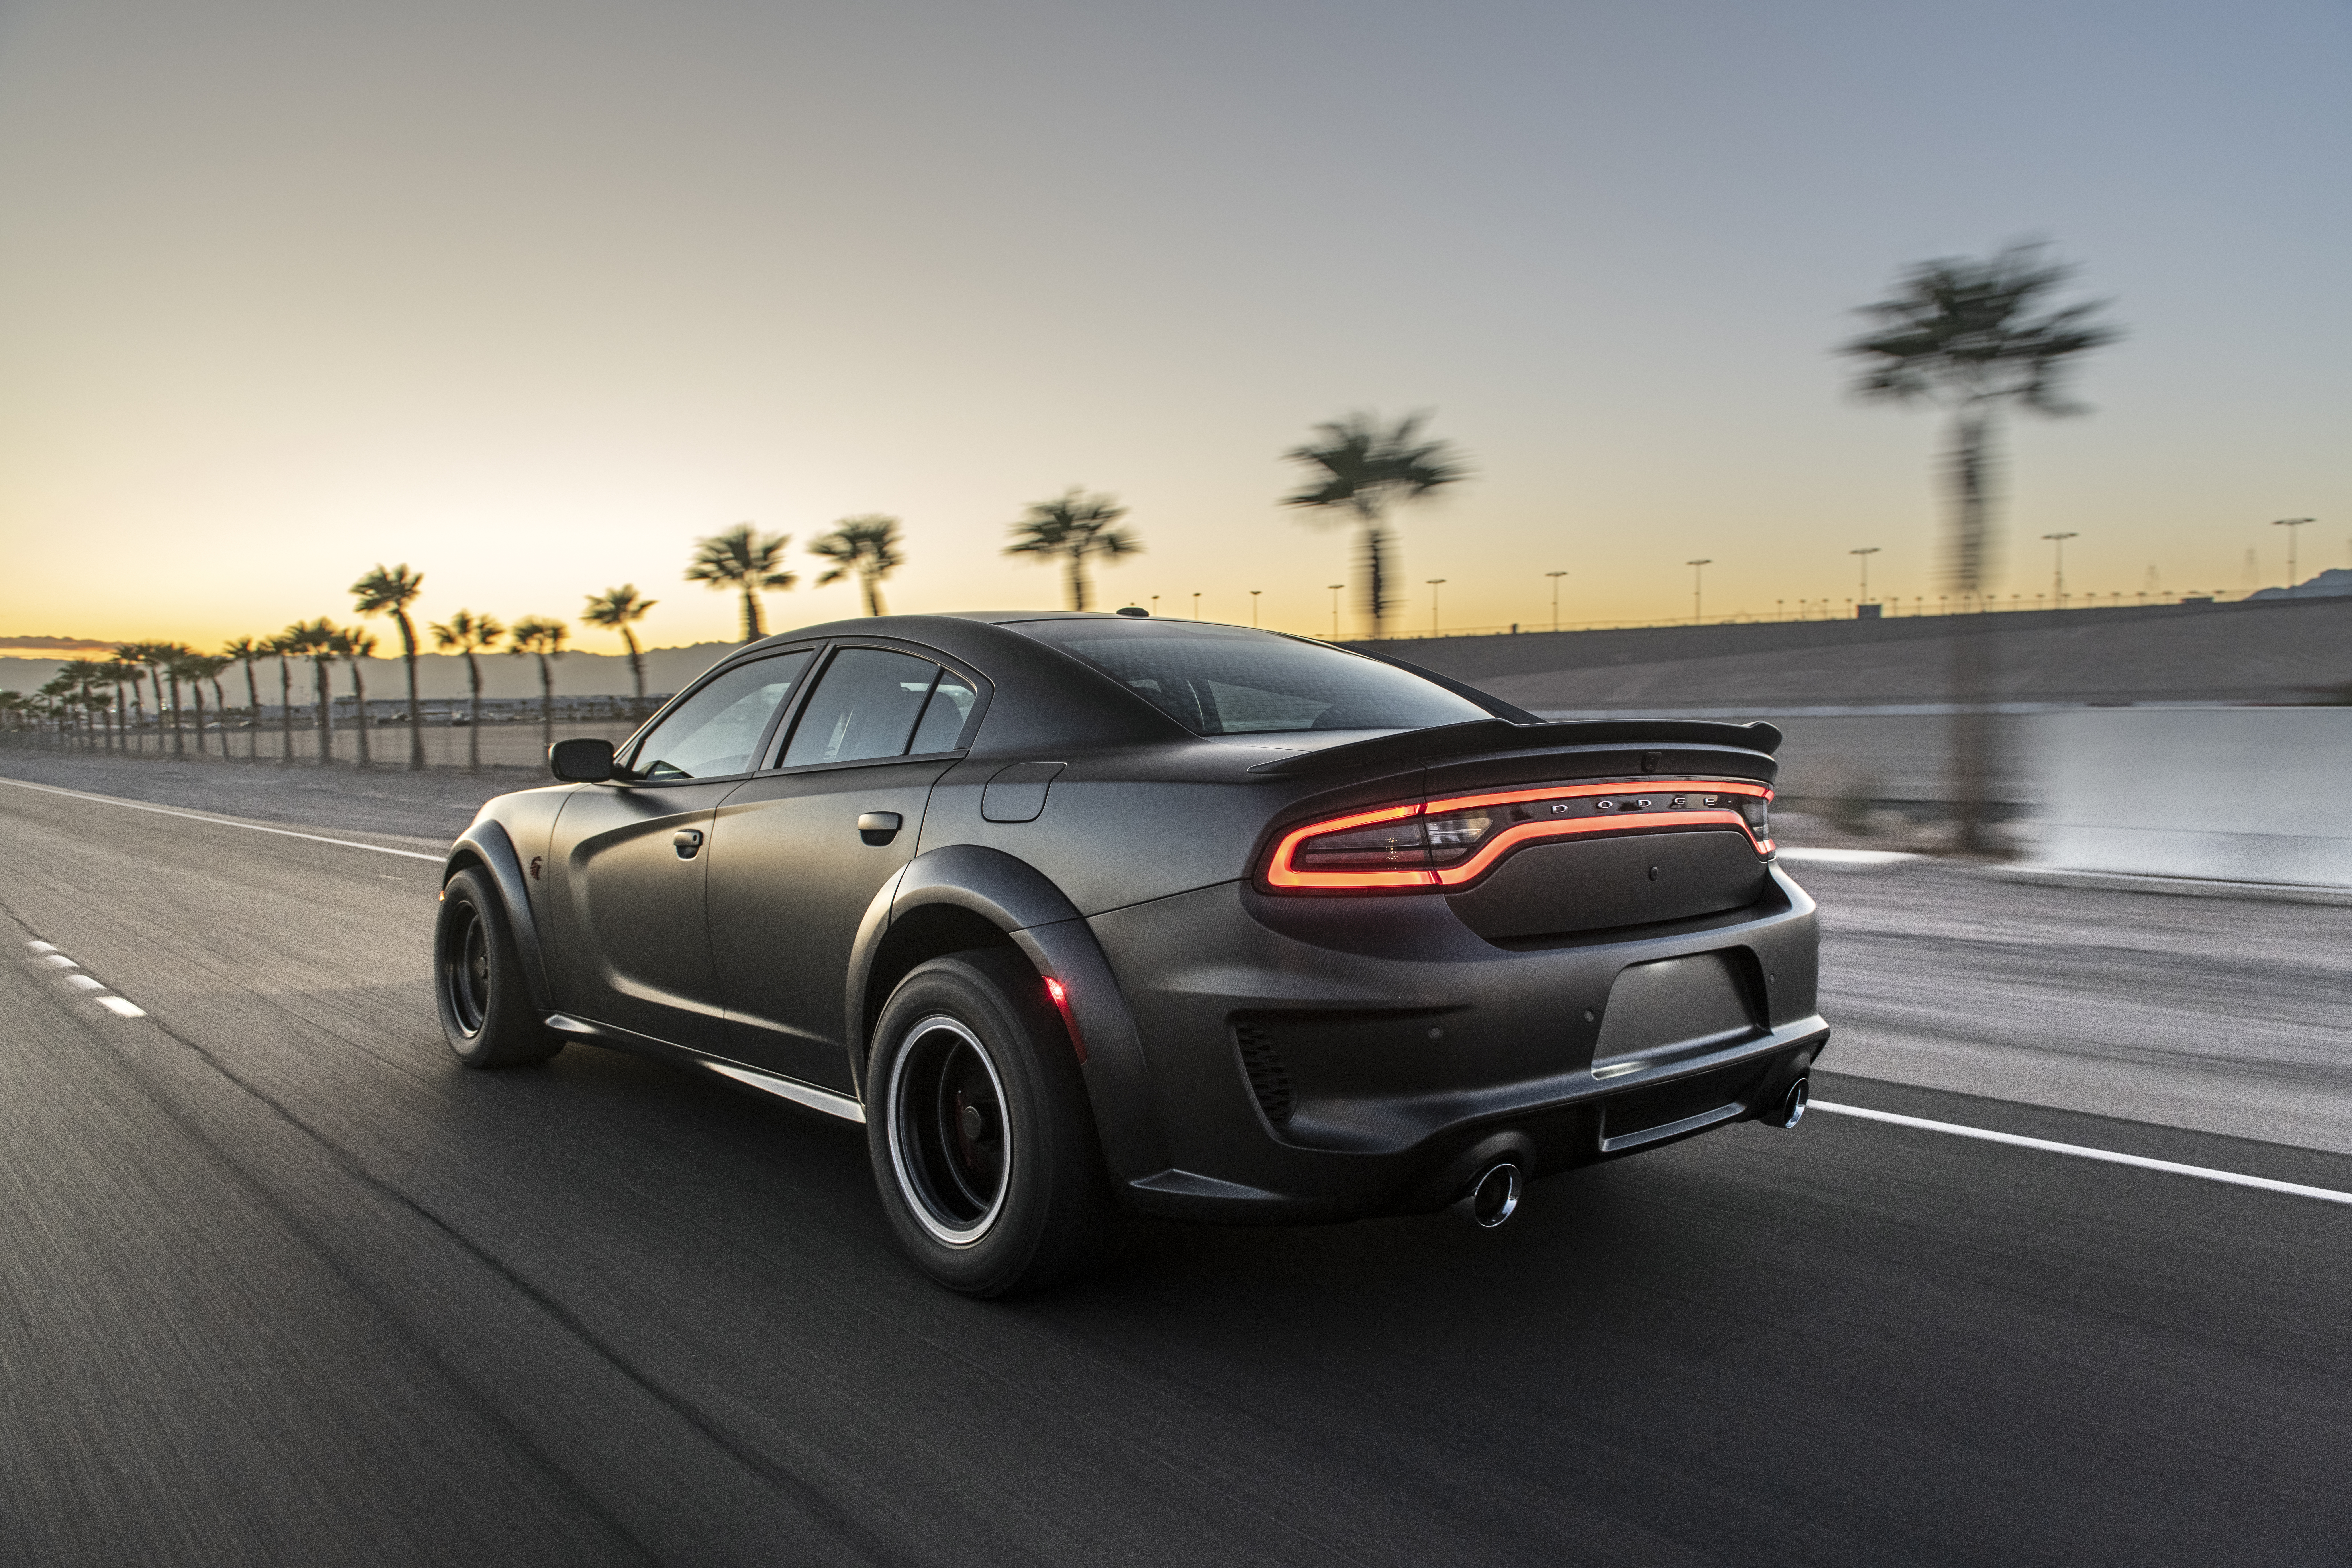 SpeedKore unveield AWD twin-turbocharged Dodge Charger at SEMA 2019